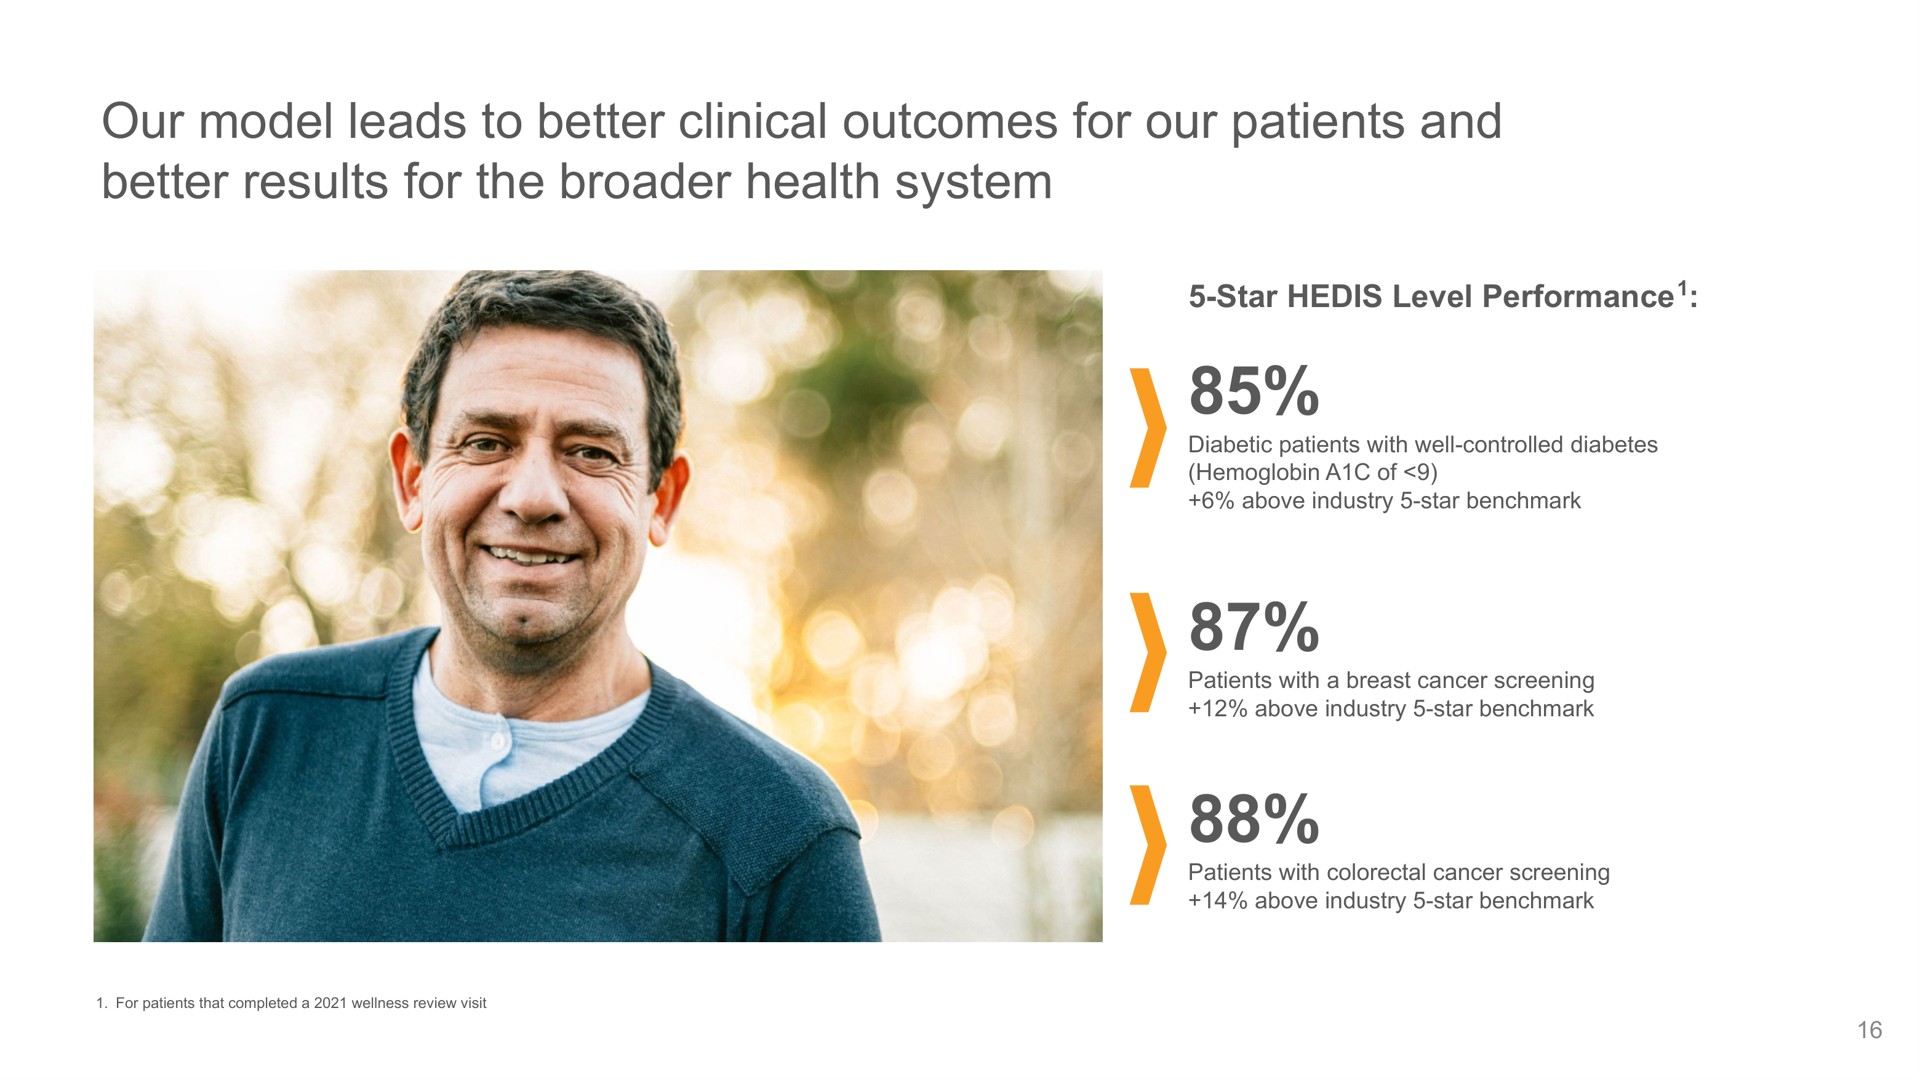 our model leads to better clinical outcomes for our patients and better results for the health system | Oak Street Health